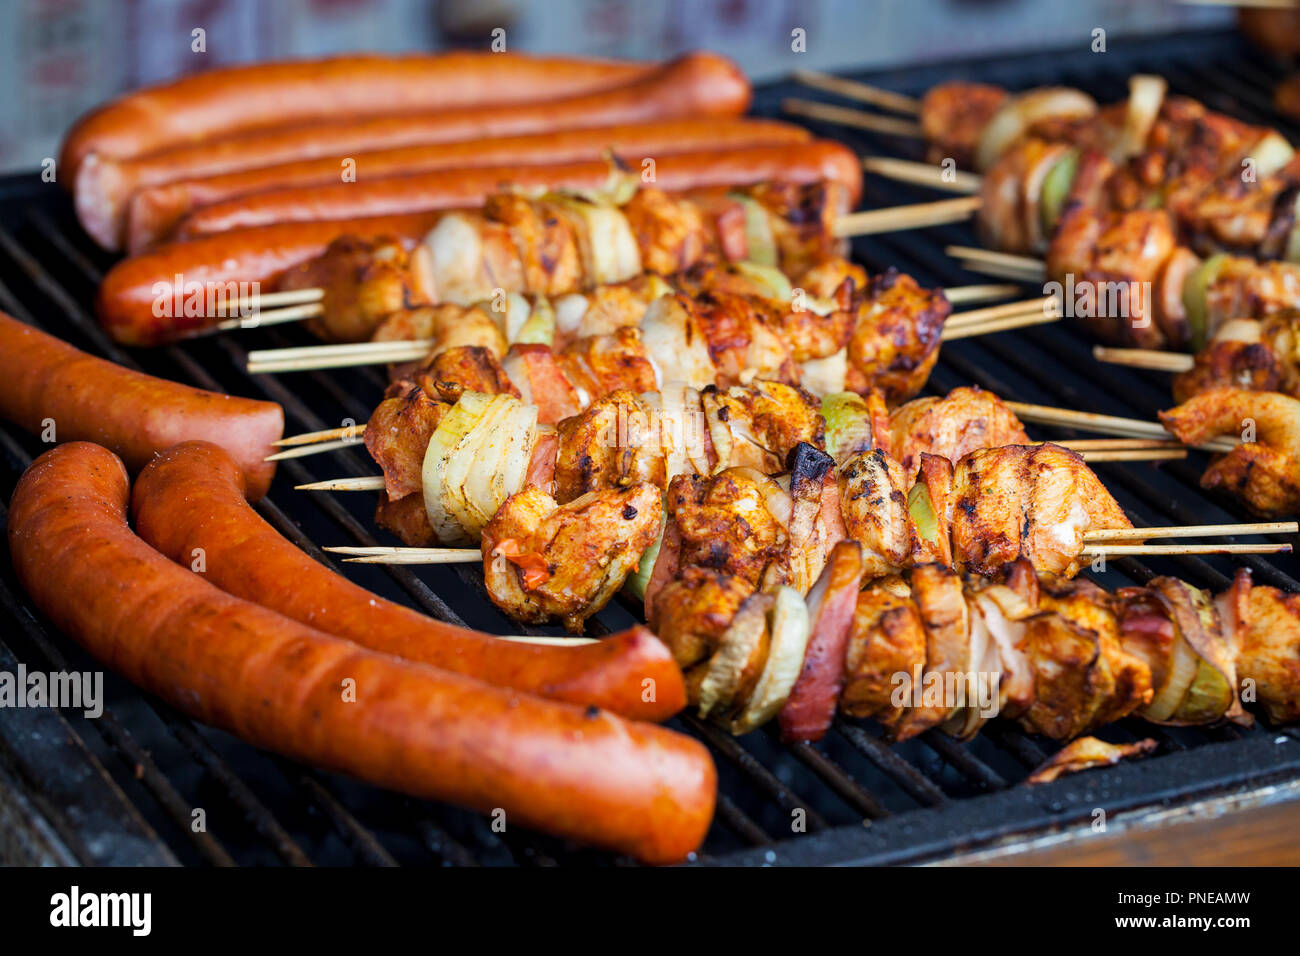 Grilled sausages and chicken skewers Stock Photo